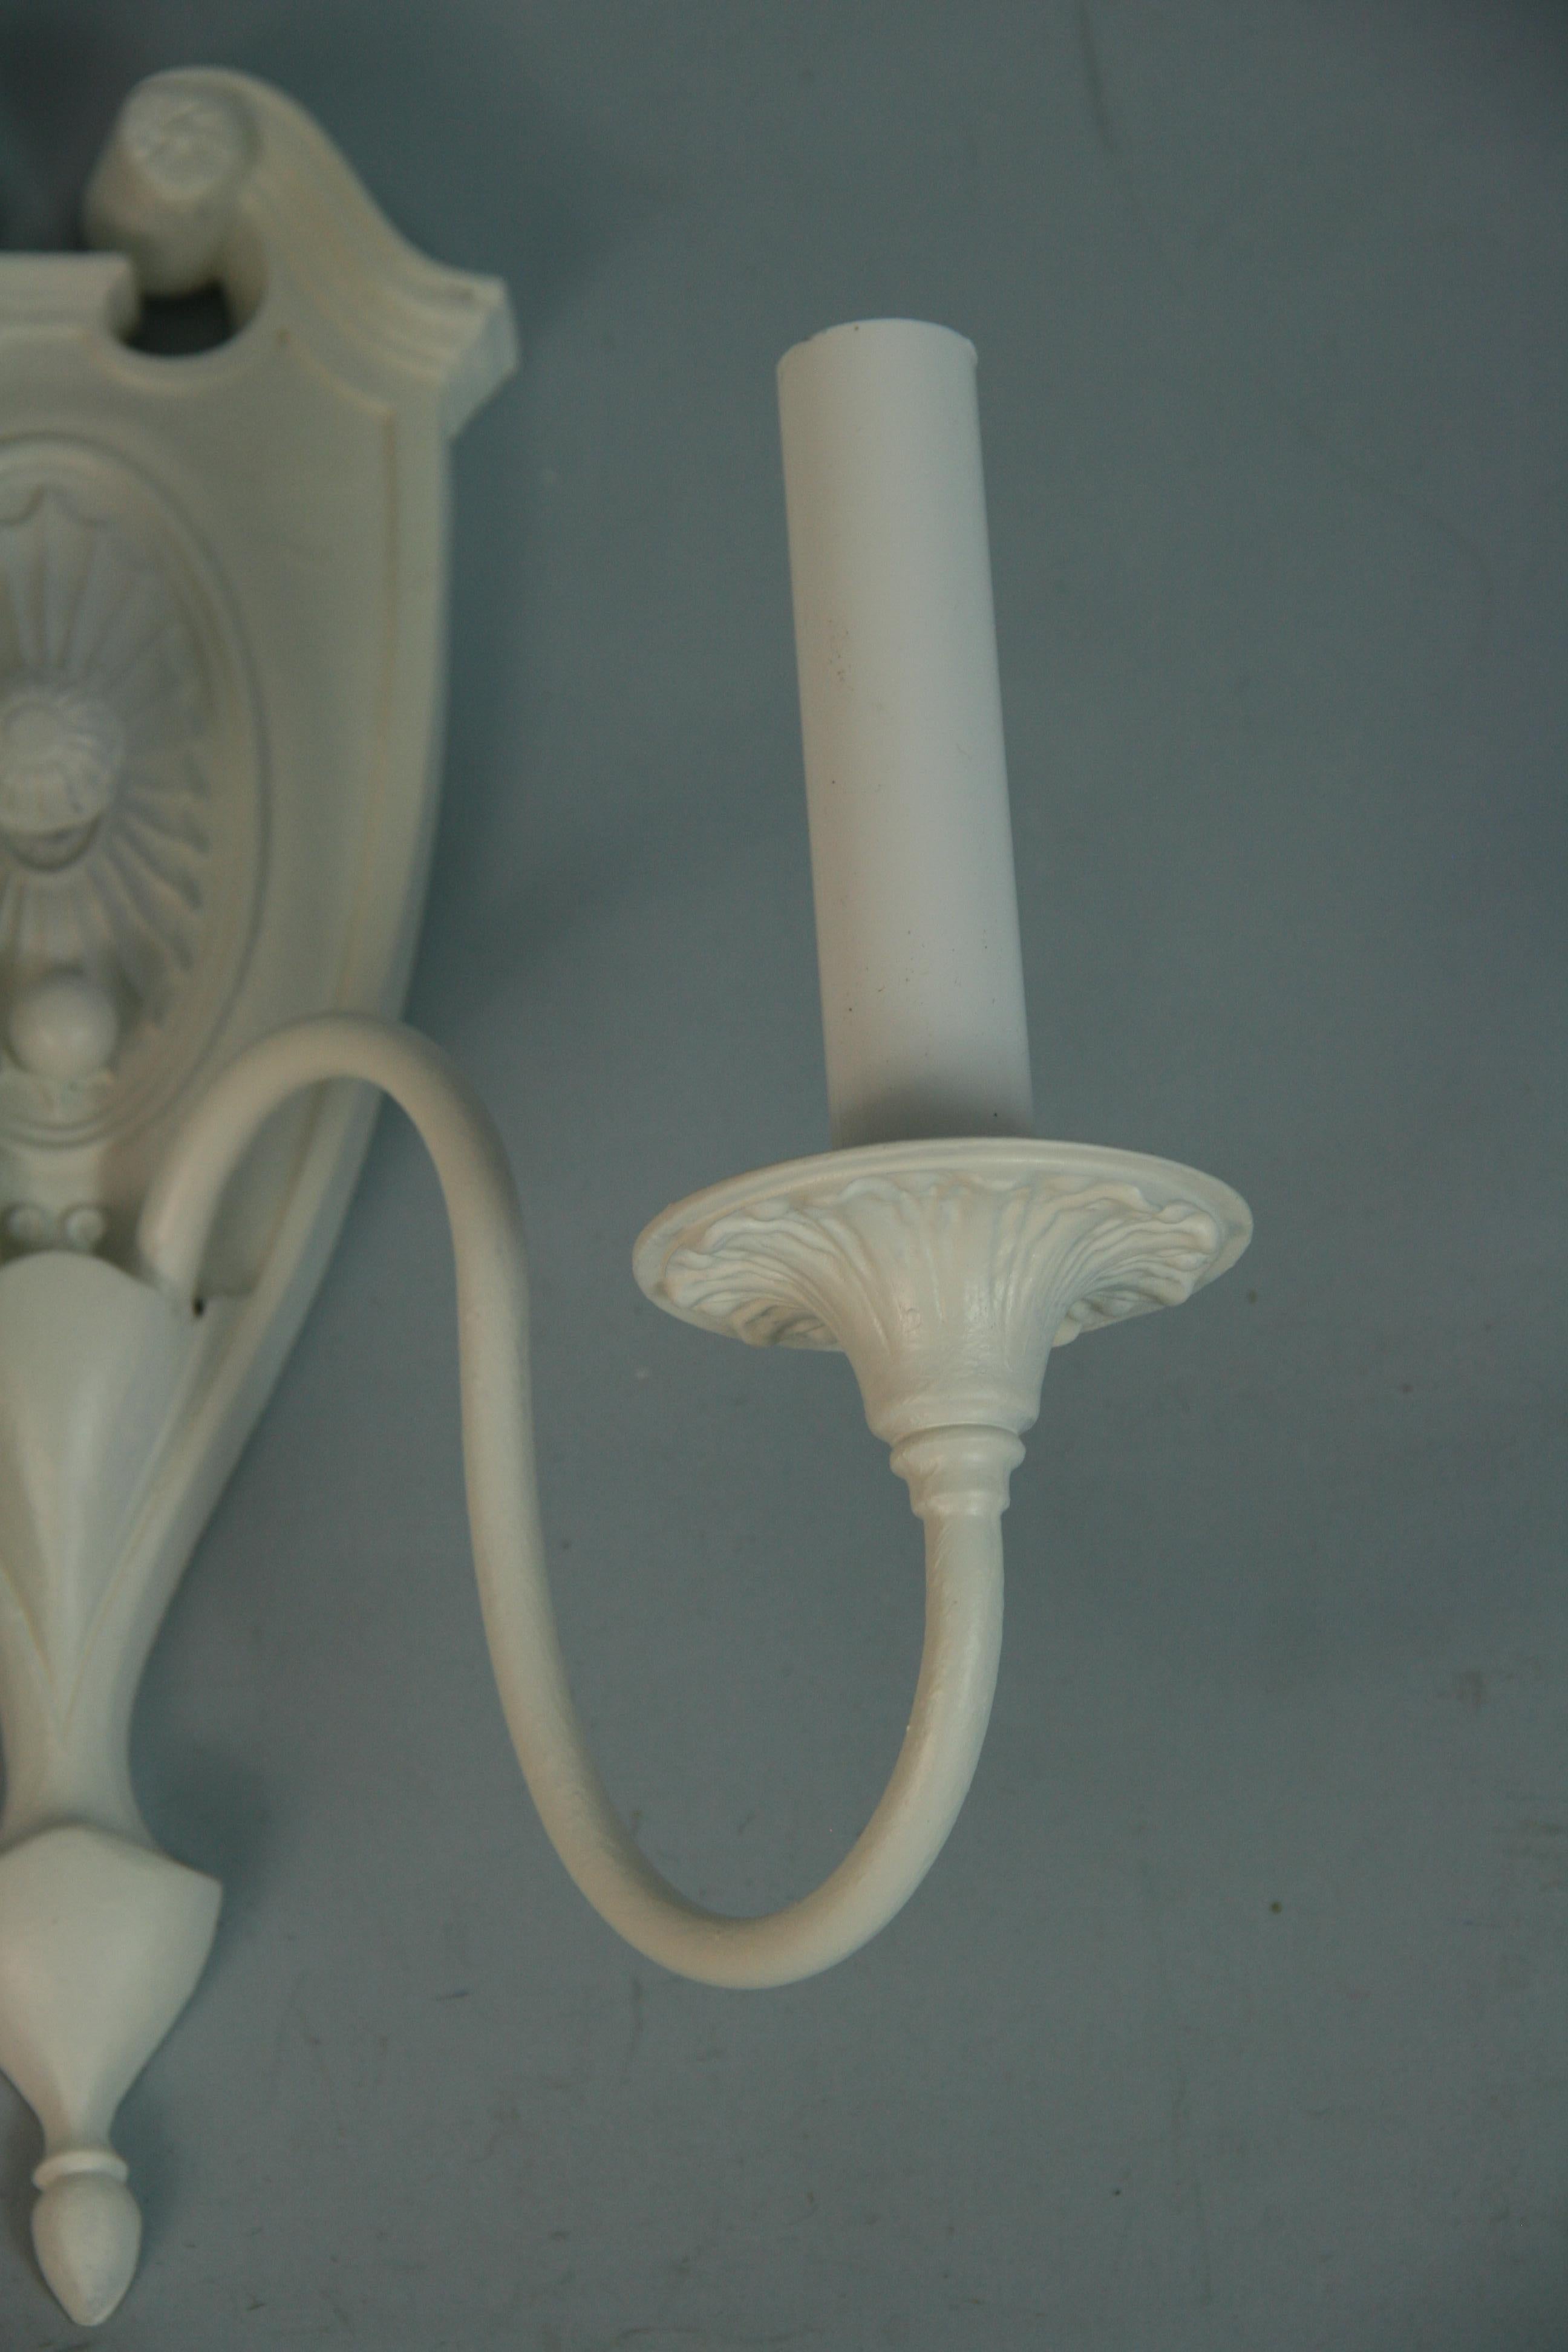 Antique Bronze Pediment Top Wall Sconces in a White Lacquer Finish a Pair 1930's For Sale 1